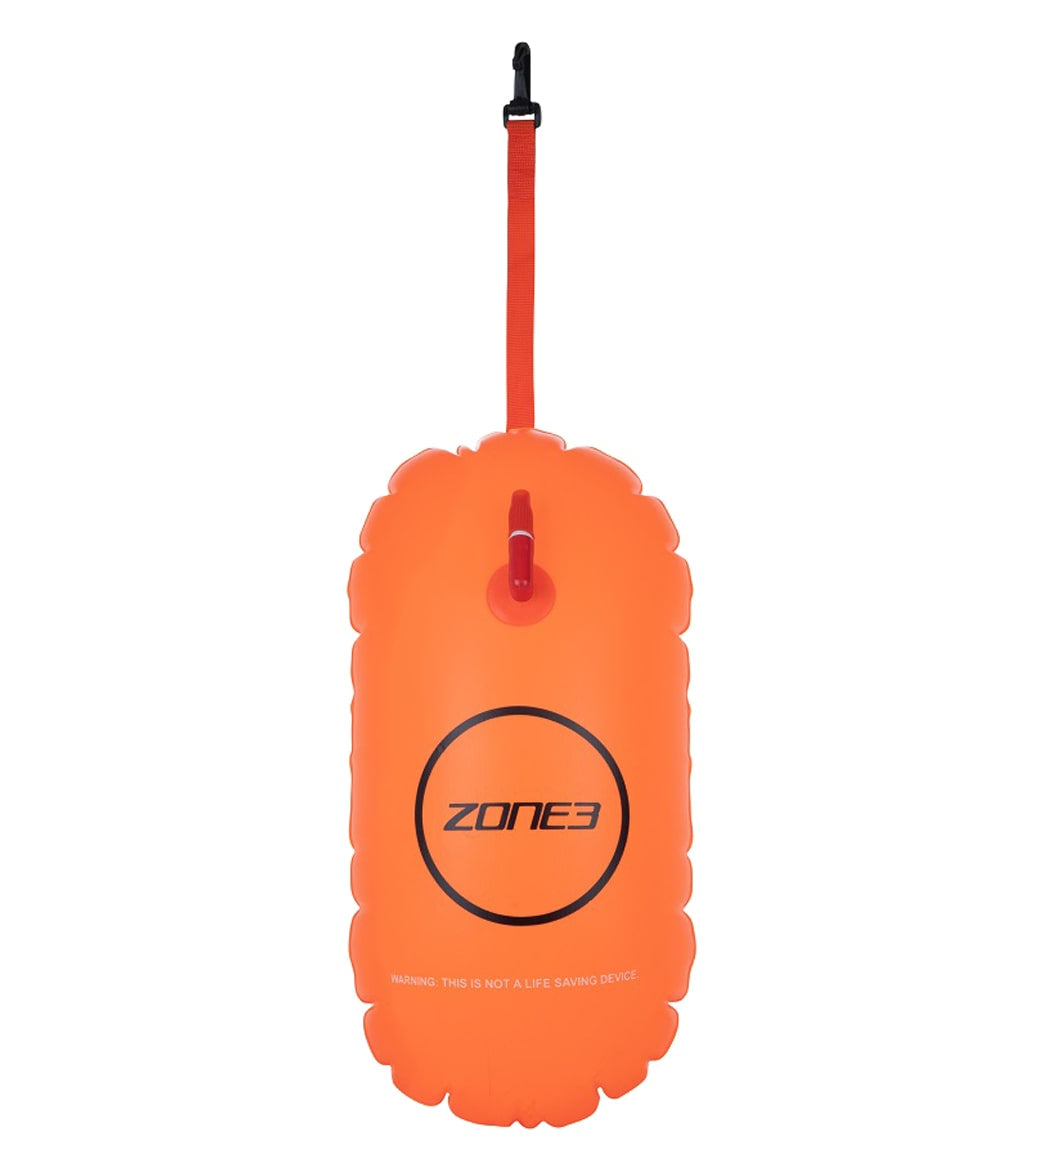 Zone3 28L Swim Safety Buoy at SwimOutlet.com